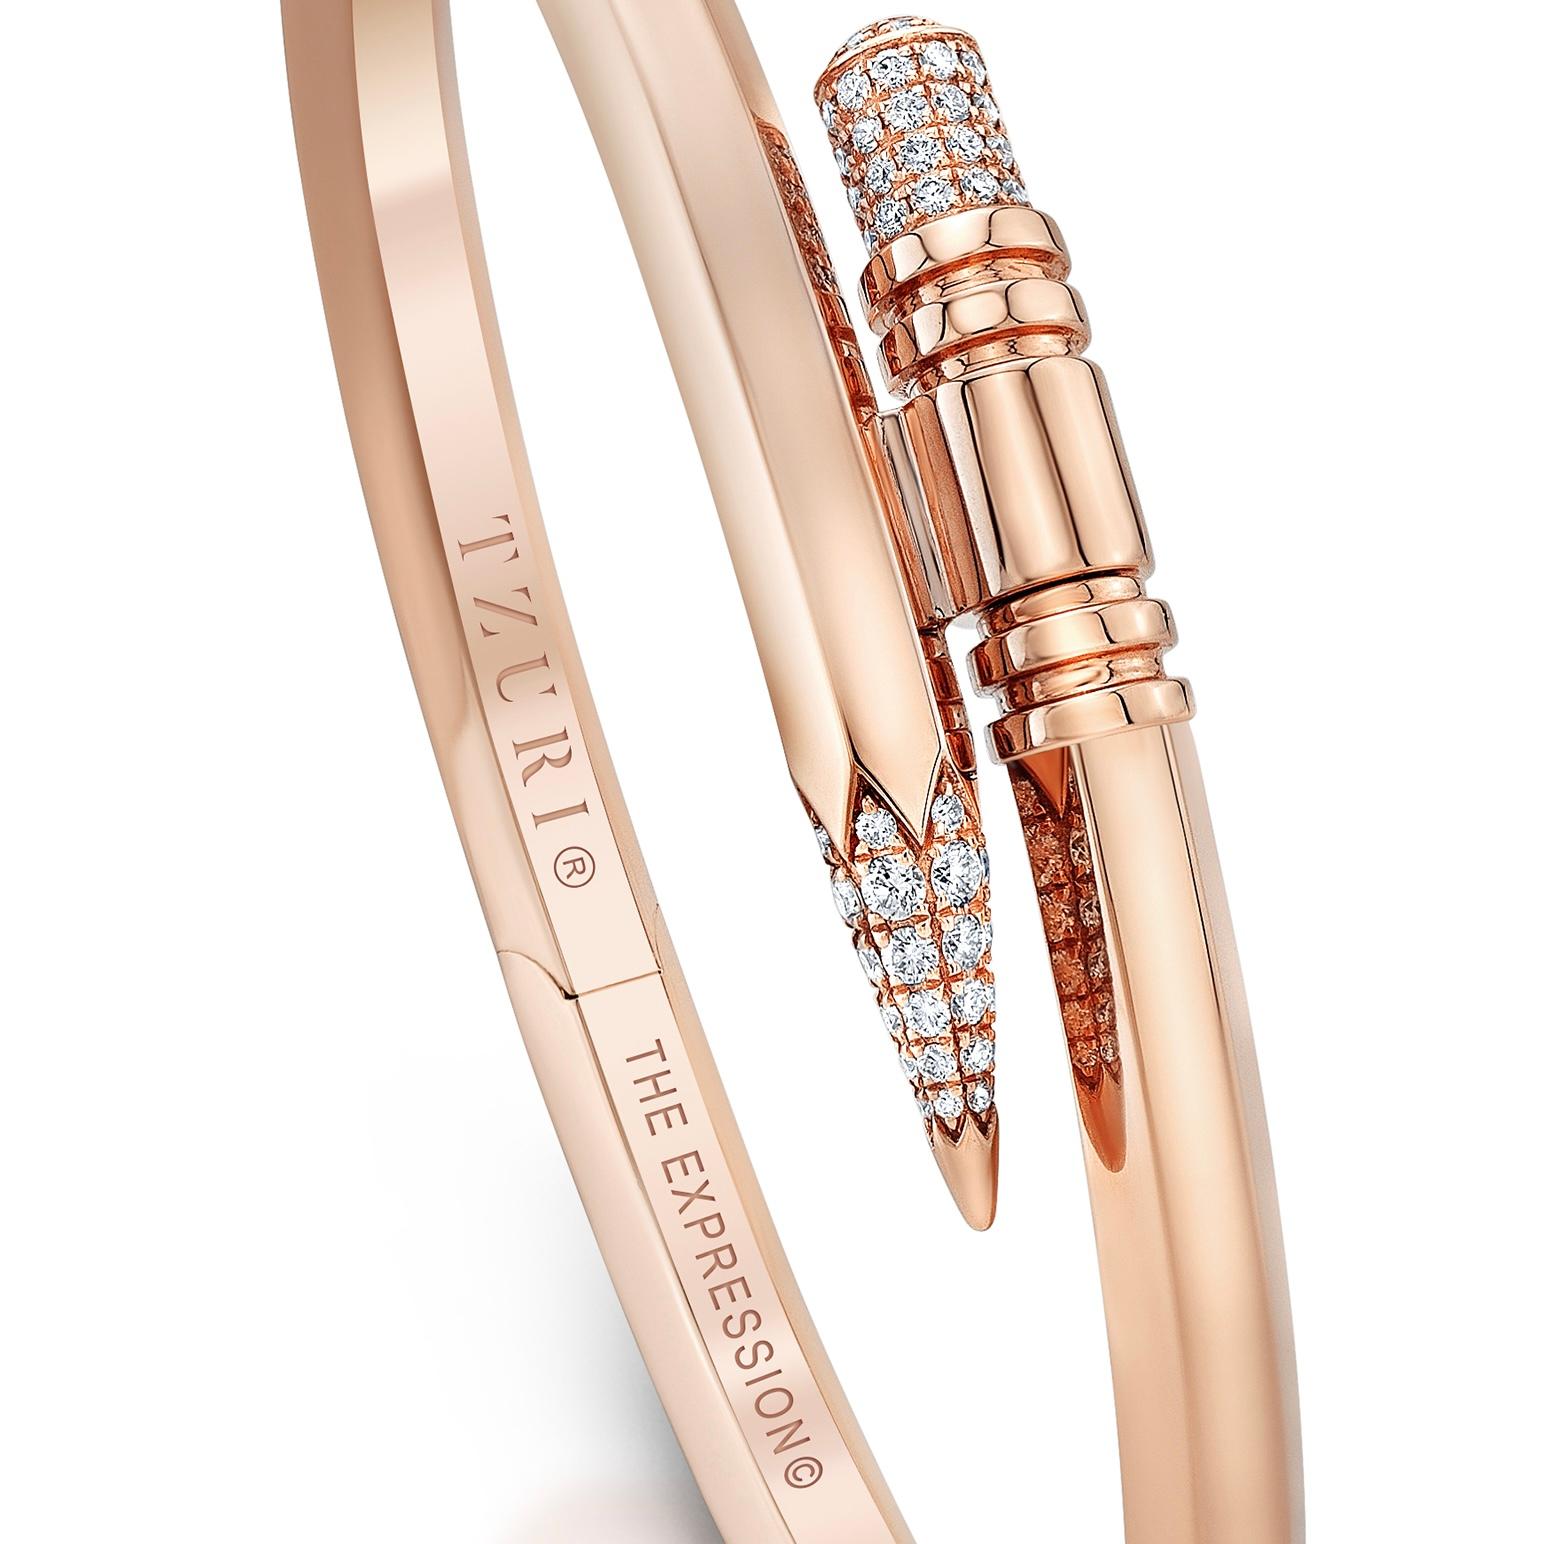 18K Rose Gold Small Expression Bracelet

4 mm Gauge Thickness

Weight: 0.45 ct (approx.)

Color: F-G
Clarity: VS+

Bracelets are produced in limited editions of 500 units, per design, annually. They are engraved with the serial number and signature